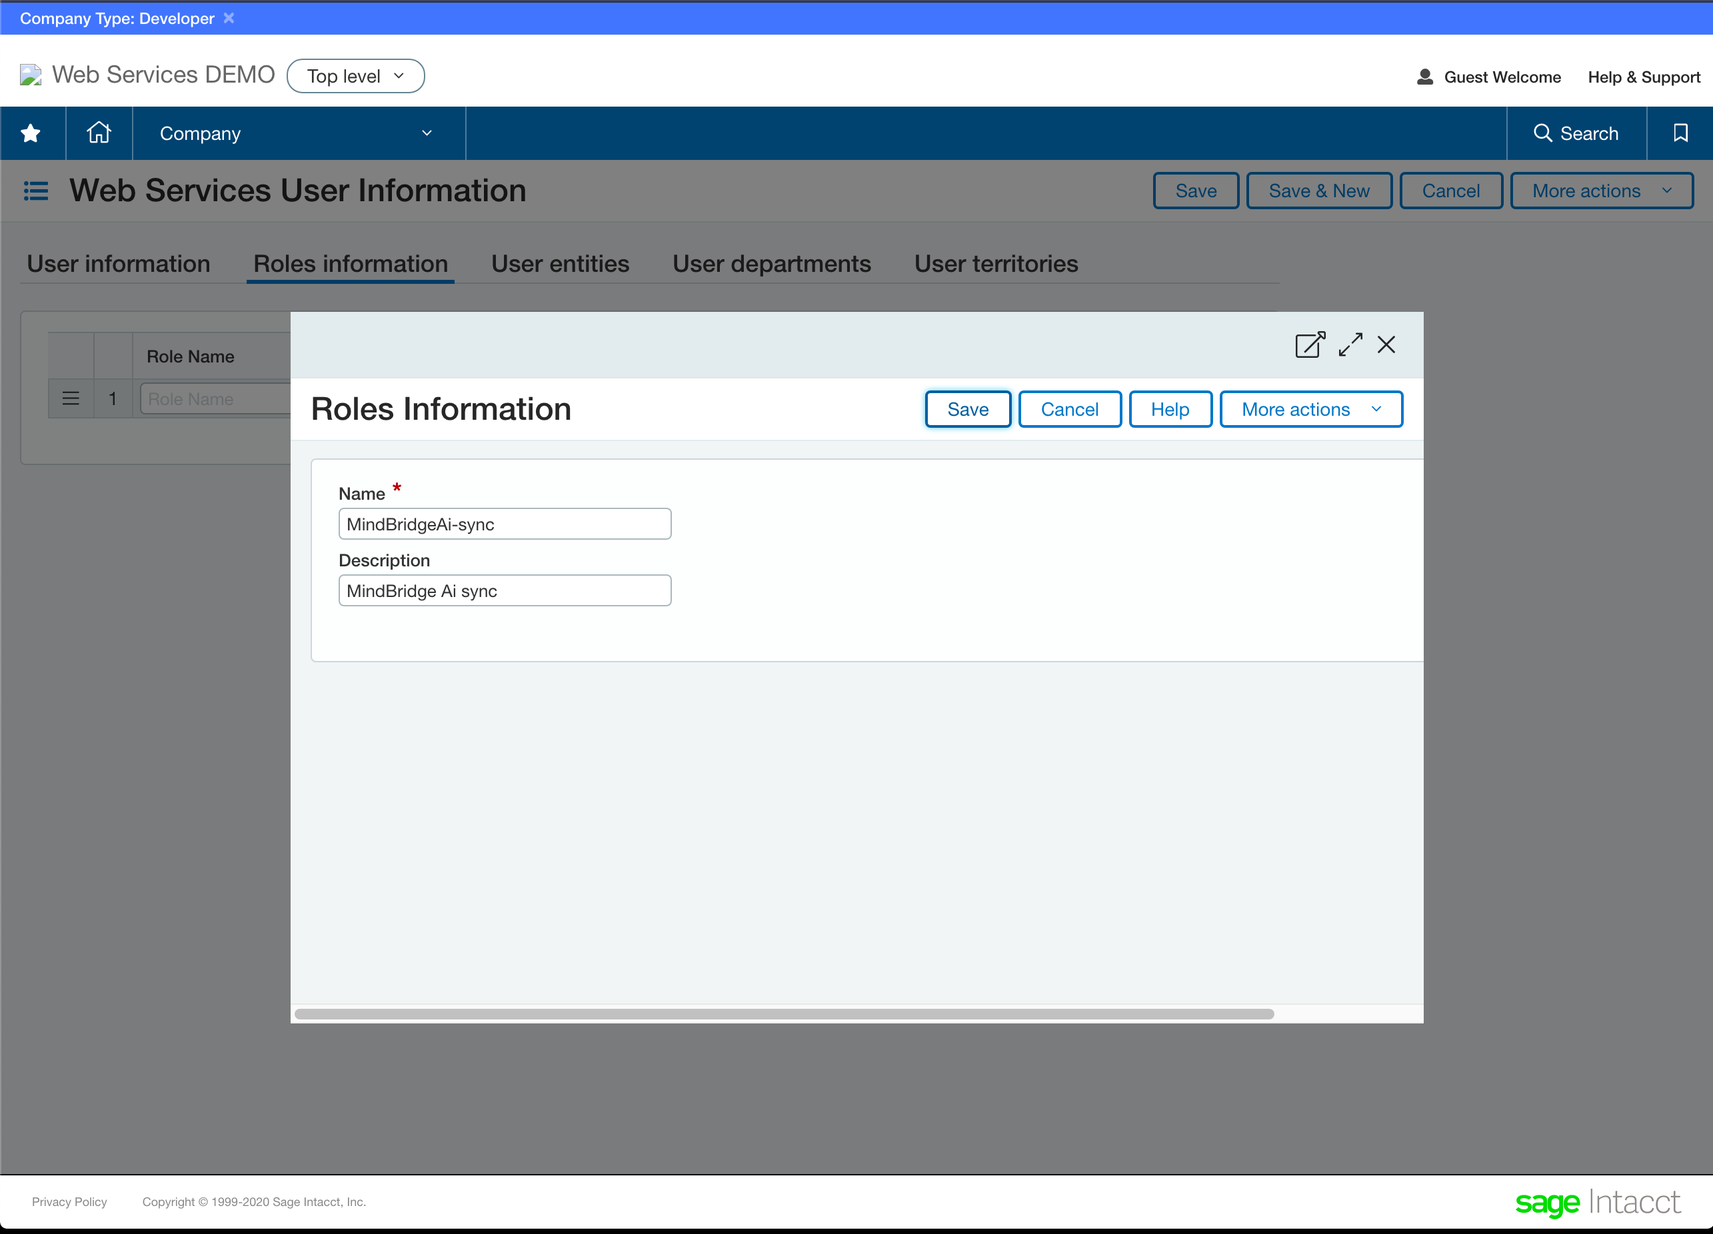 intacct roles information screen with MindBridge information filled out